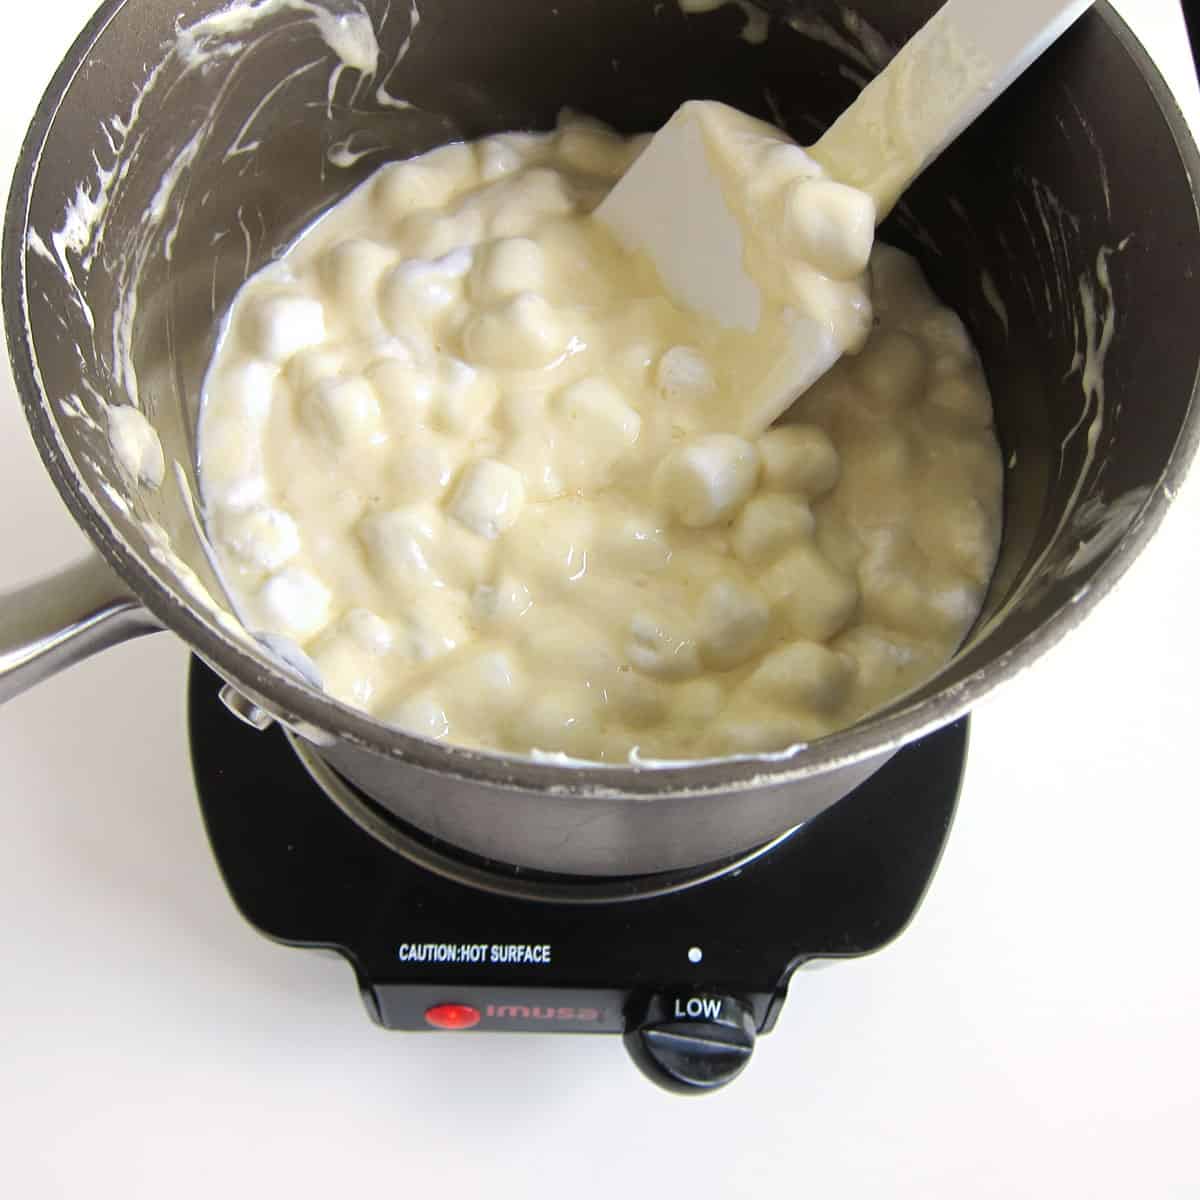 butter, white candy melts, and mini marshmallows melting in a saucepan set over low heat.